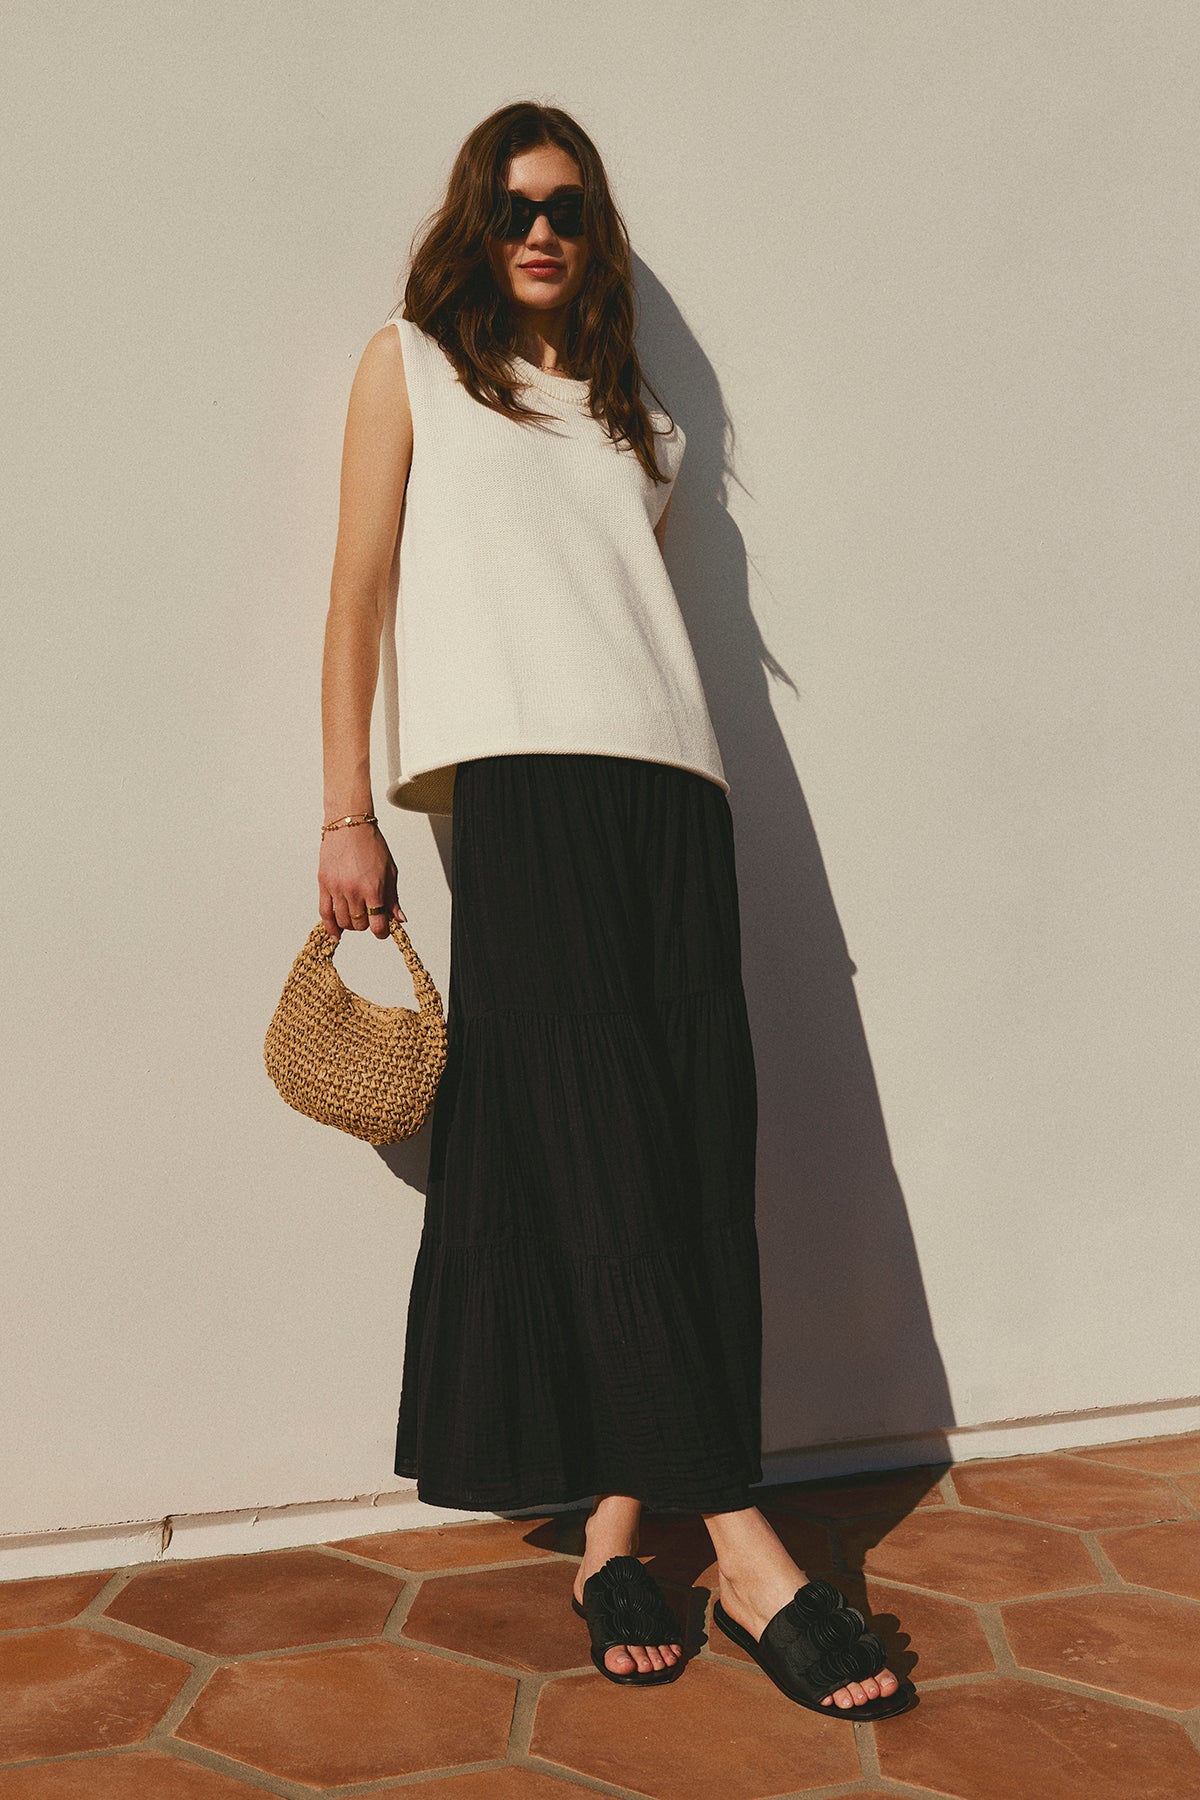 A woman in sunglasses, a white sleeveless top, and a DANIELLE COTTON GAUZE TIERED SKIRT from Velvet by Graham & Spencer stands on a tiled surface, holding a straw bag.-36783738814657